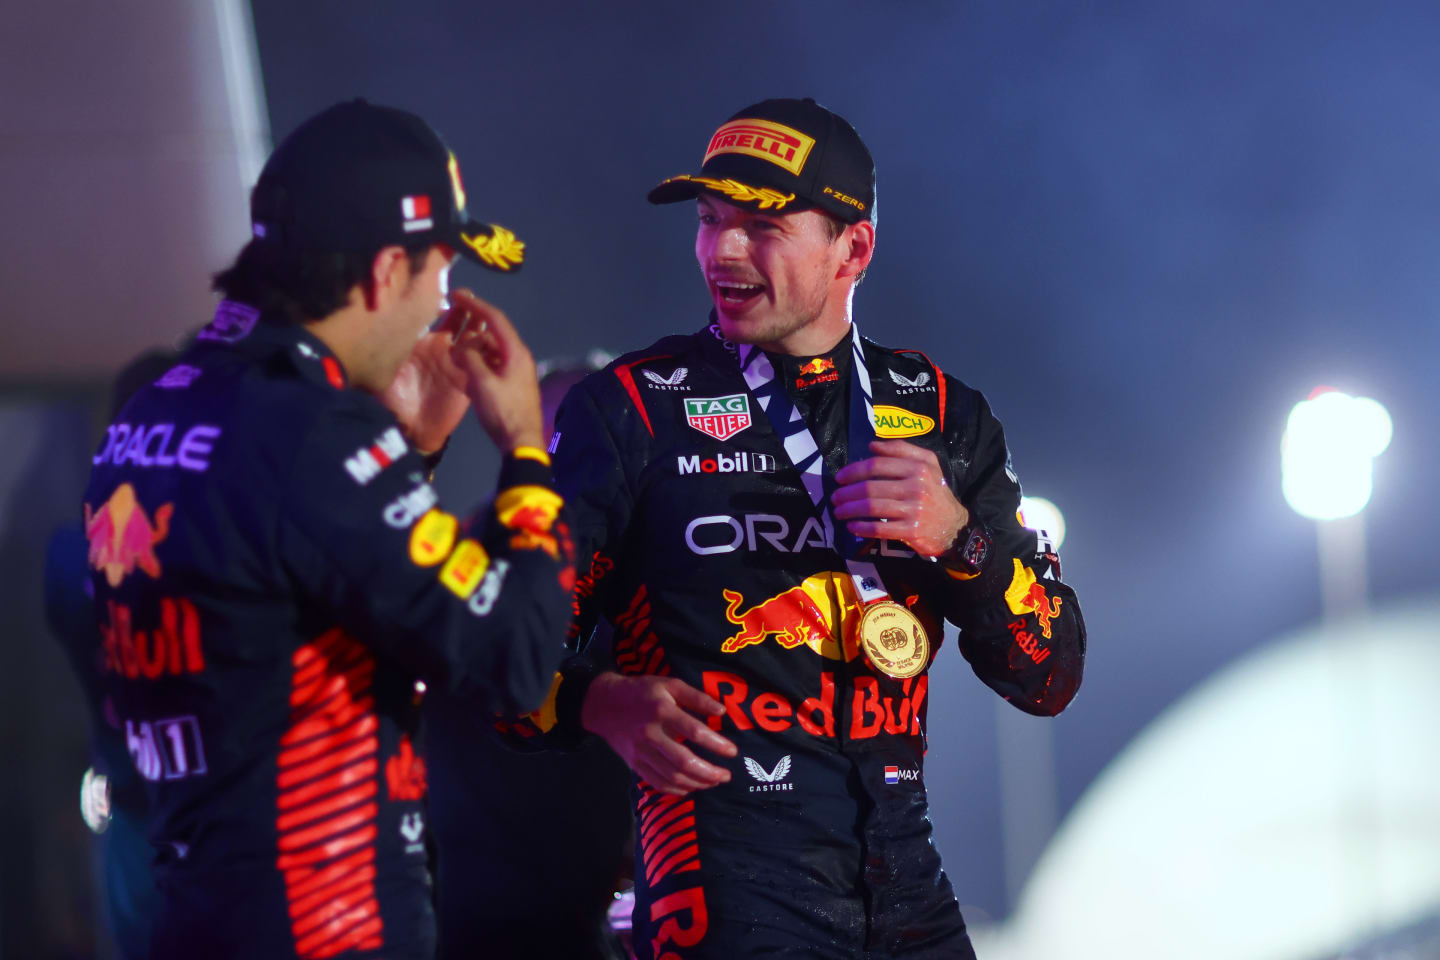 BAHRAIN, BAHRAIN - MARCH 05: Race winner Max Verstappen of the Netherlands and Oracle Red Bull Racing celebrates with team-mate Second placed Sergio Perez of Mexico and Oracle Red Bull Racing on the podium during the F1 Grand Prix of Bahrain at Bahrain International Circuit on March 05, 2023 in Bahrain, Bahrain. (Photo by Dan Istitene - Formula 1/Formula 1 via Getty Images)